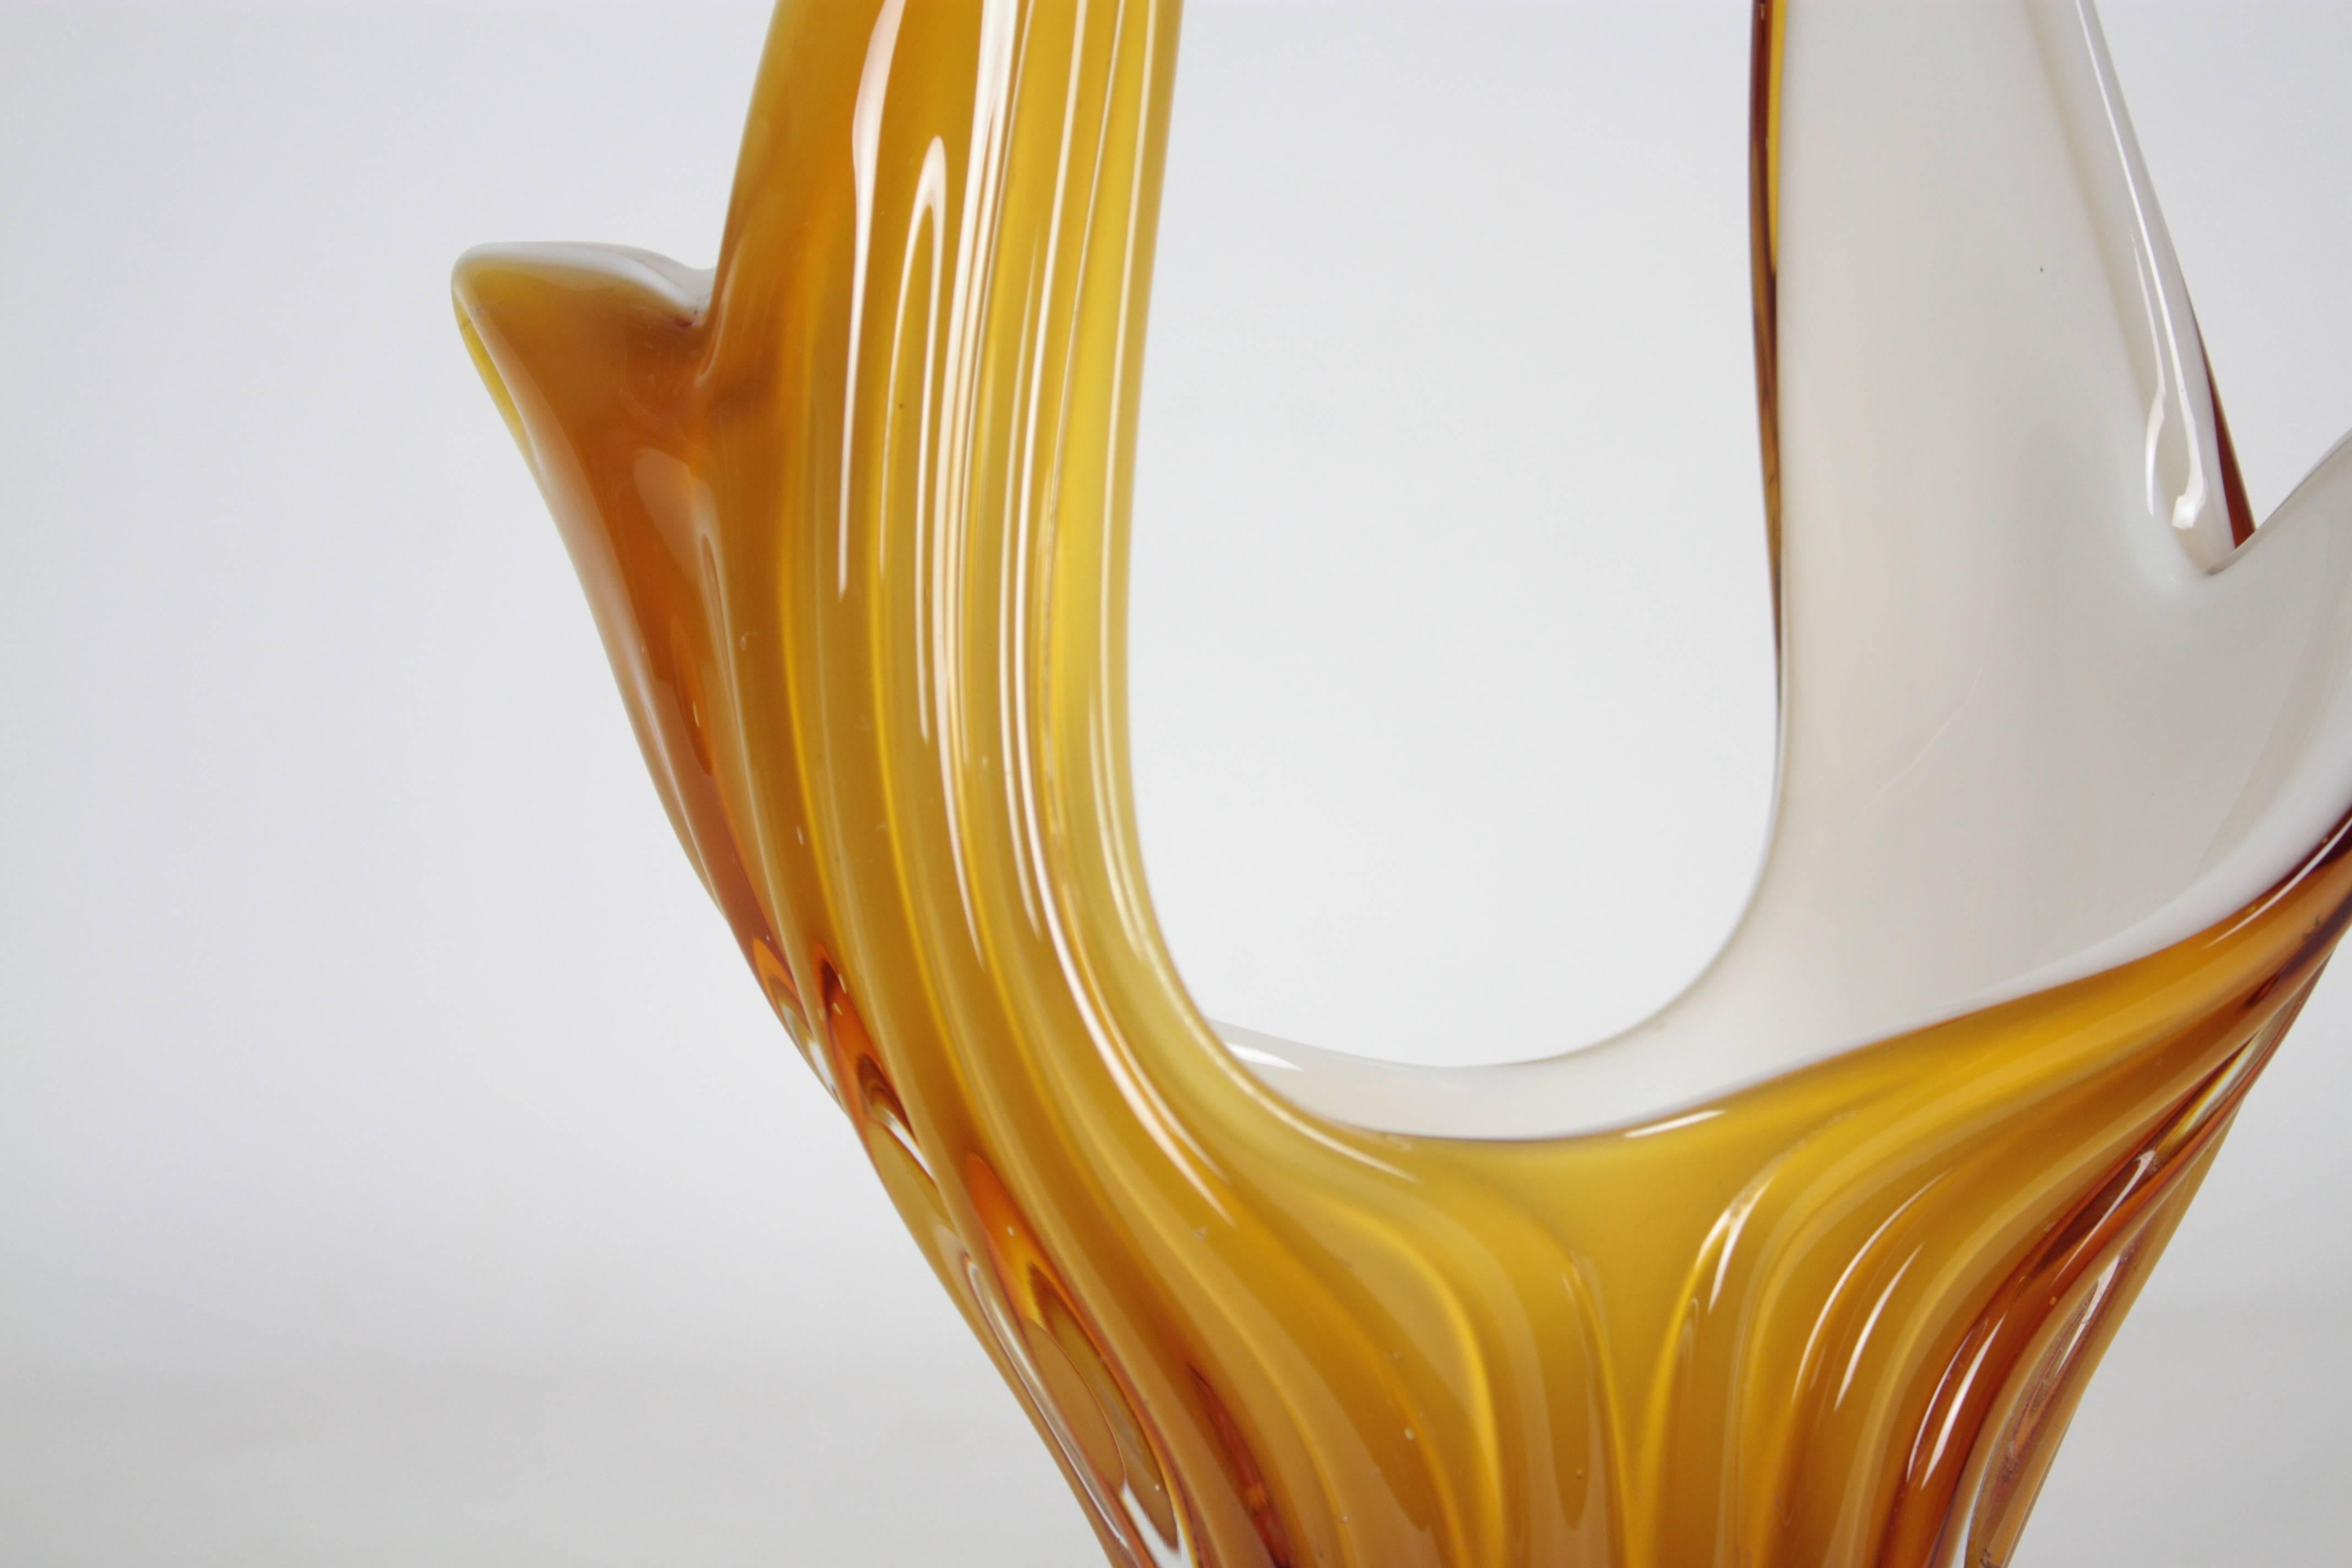 Sculptural Murano glass vase or centerpiece in a delicate toffee color. The interior part is made in opaline glass. Beautiful shapes and very decorative,
Murano, circa 1960.

Available more Murano glass pieces.
Please, kindly check our